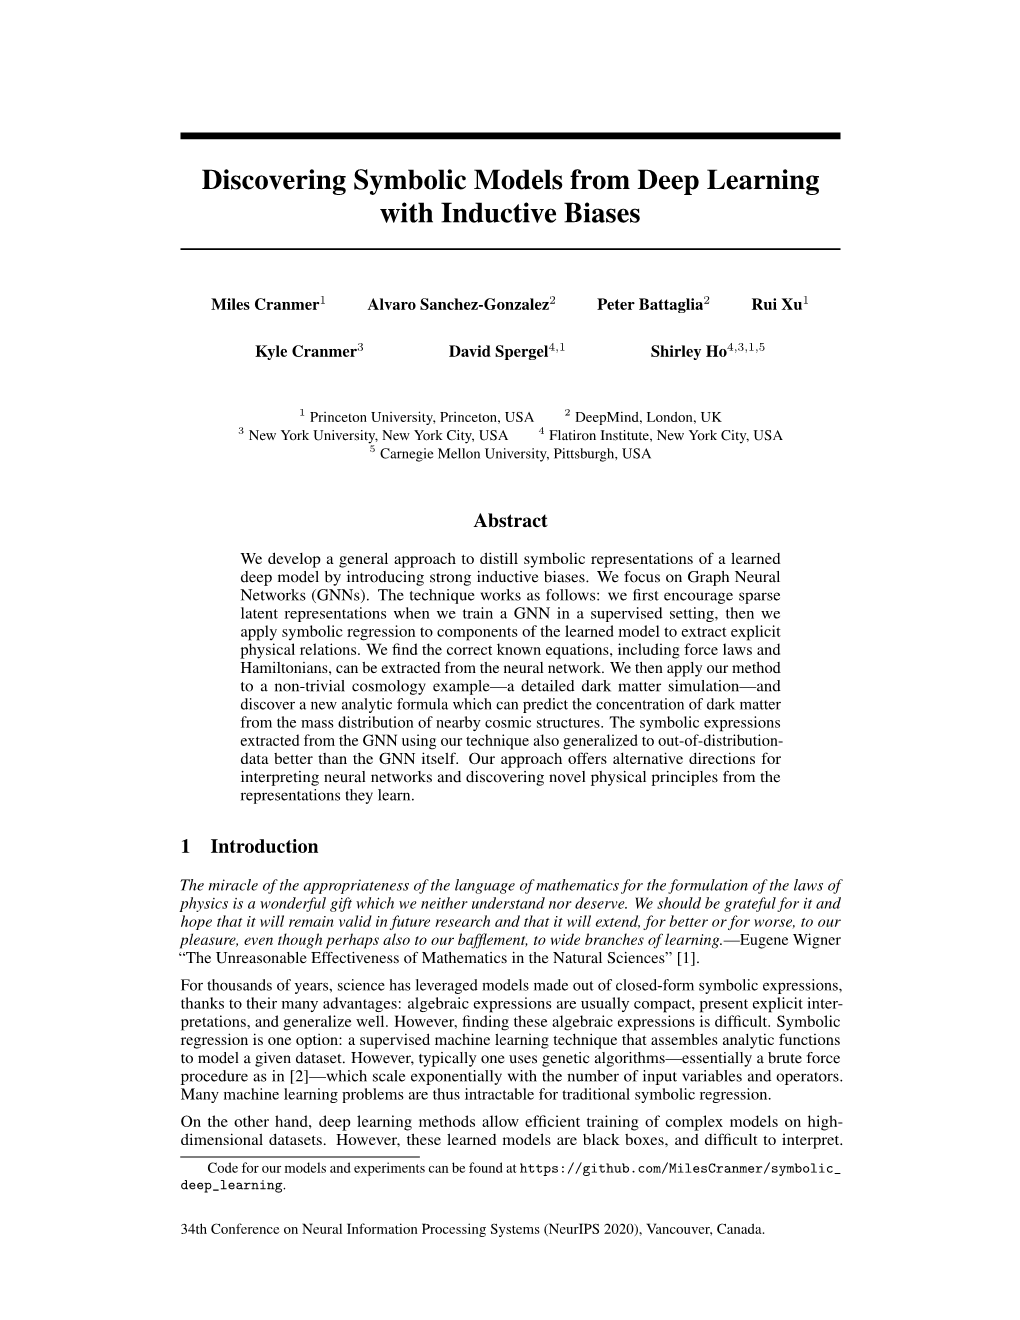 Discovering Symbolic Models from Deep Learning with Inductive Biases